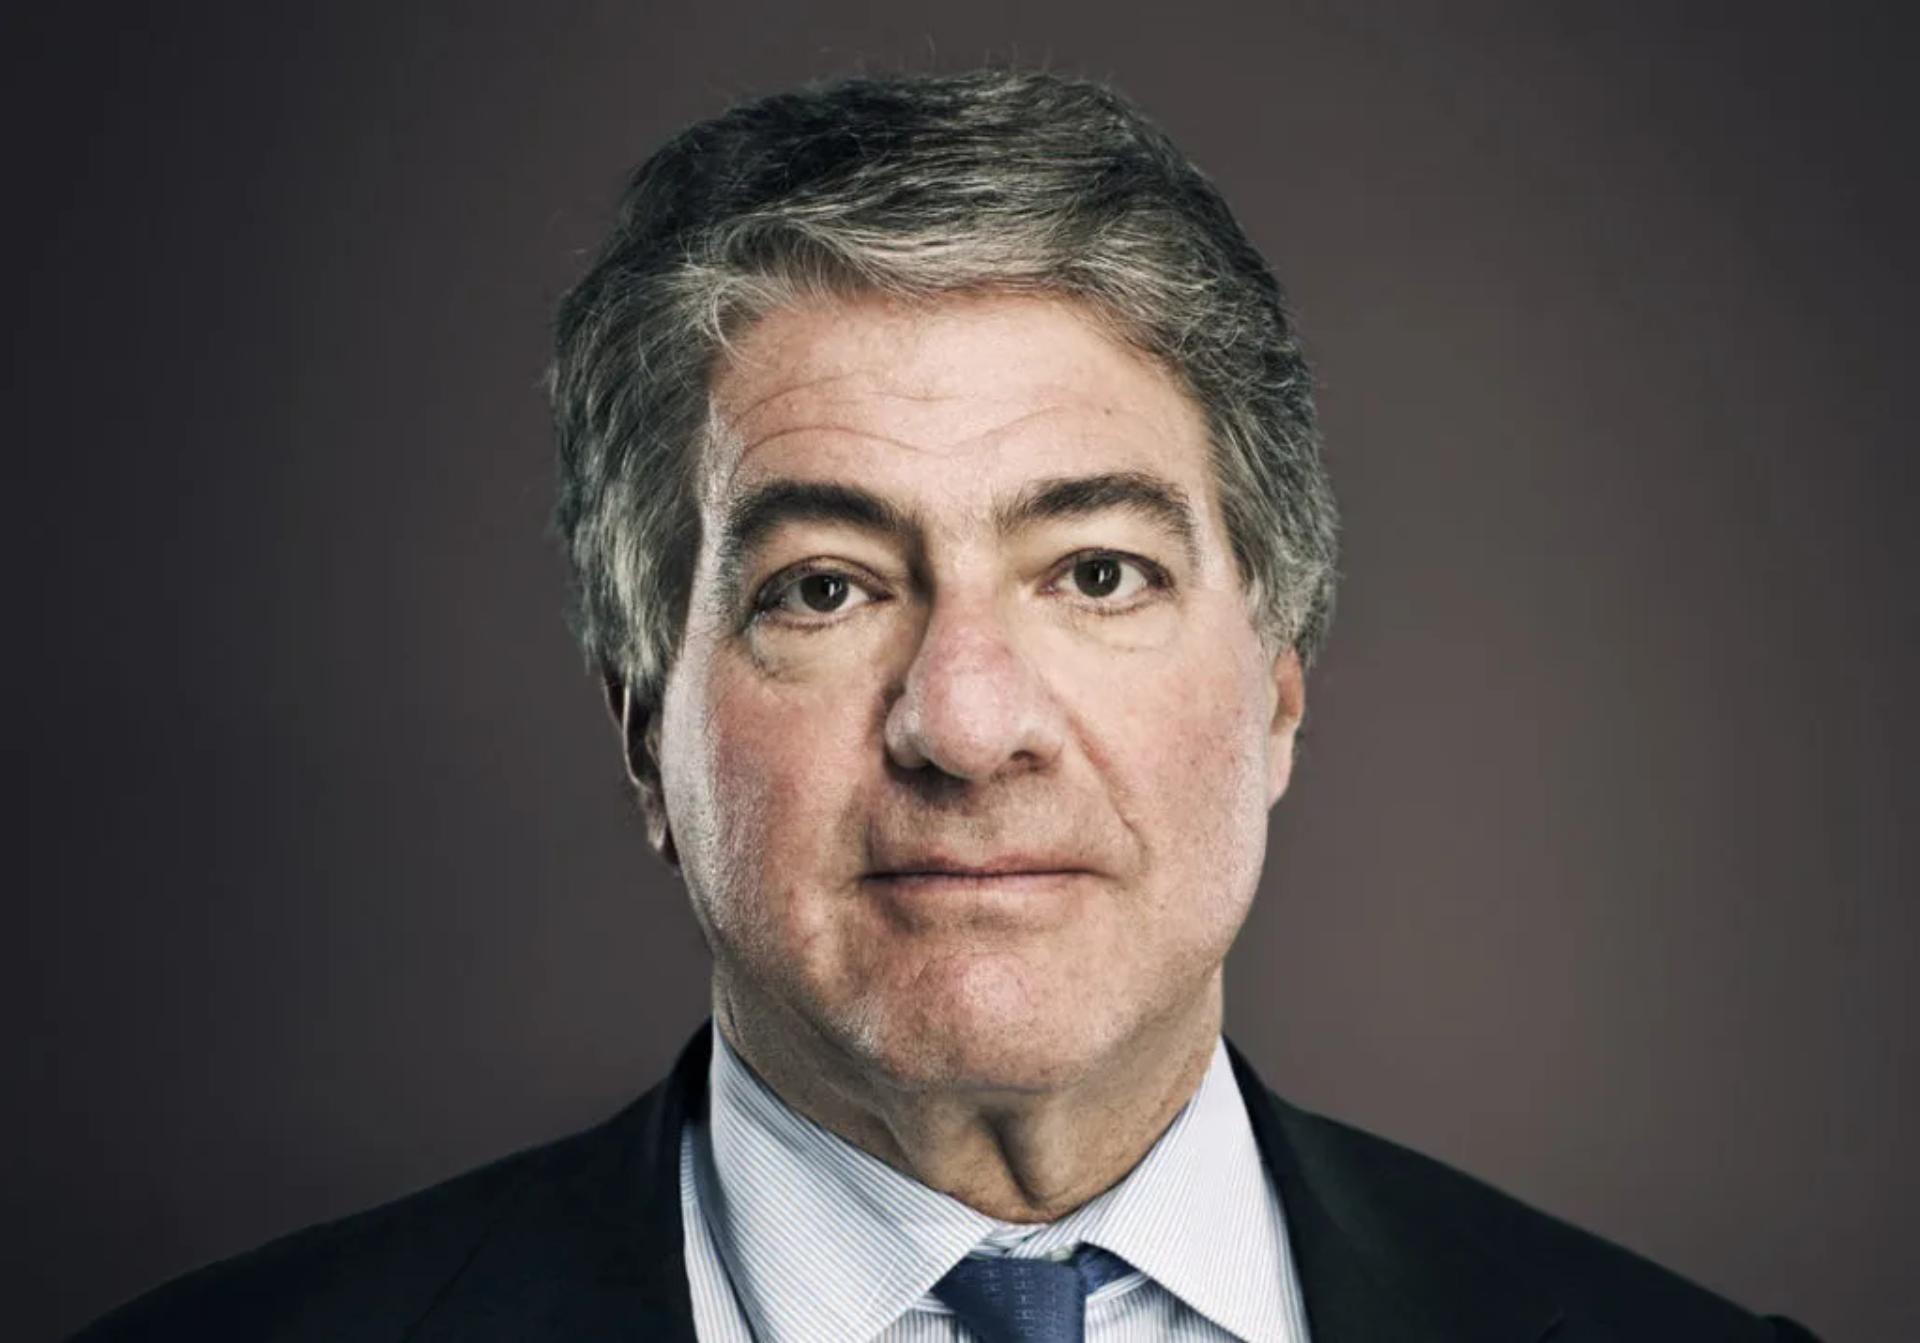 MoMA trustee and former board chairman Leon Black. 

Courtesy Apollo Global Management